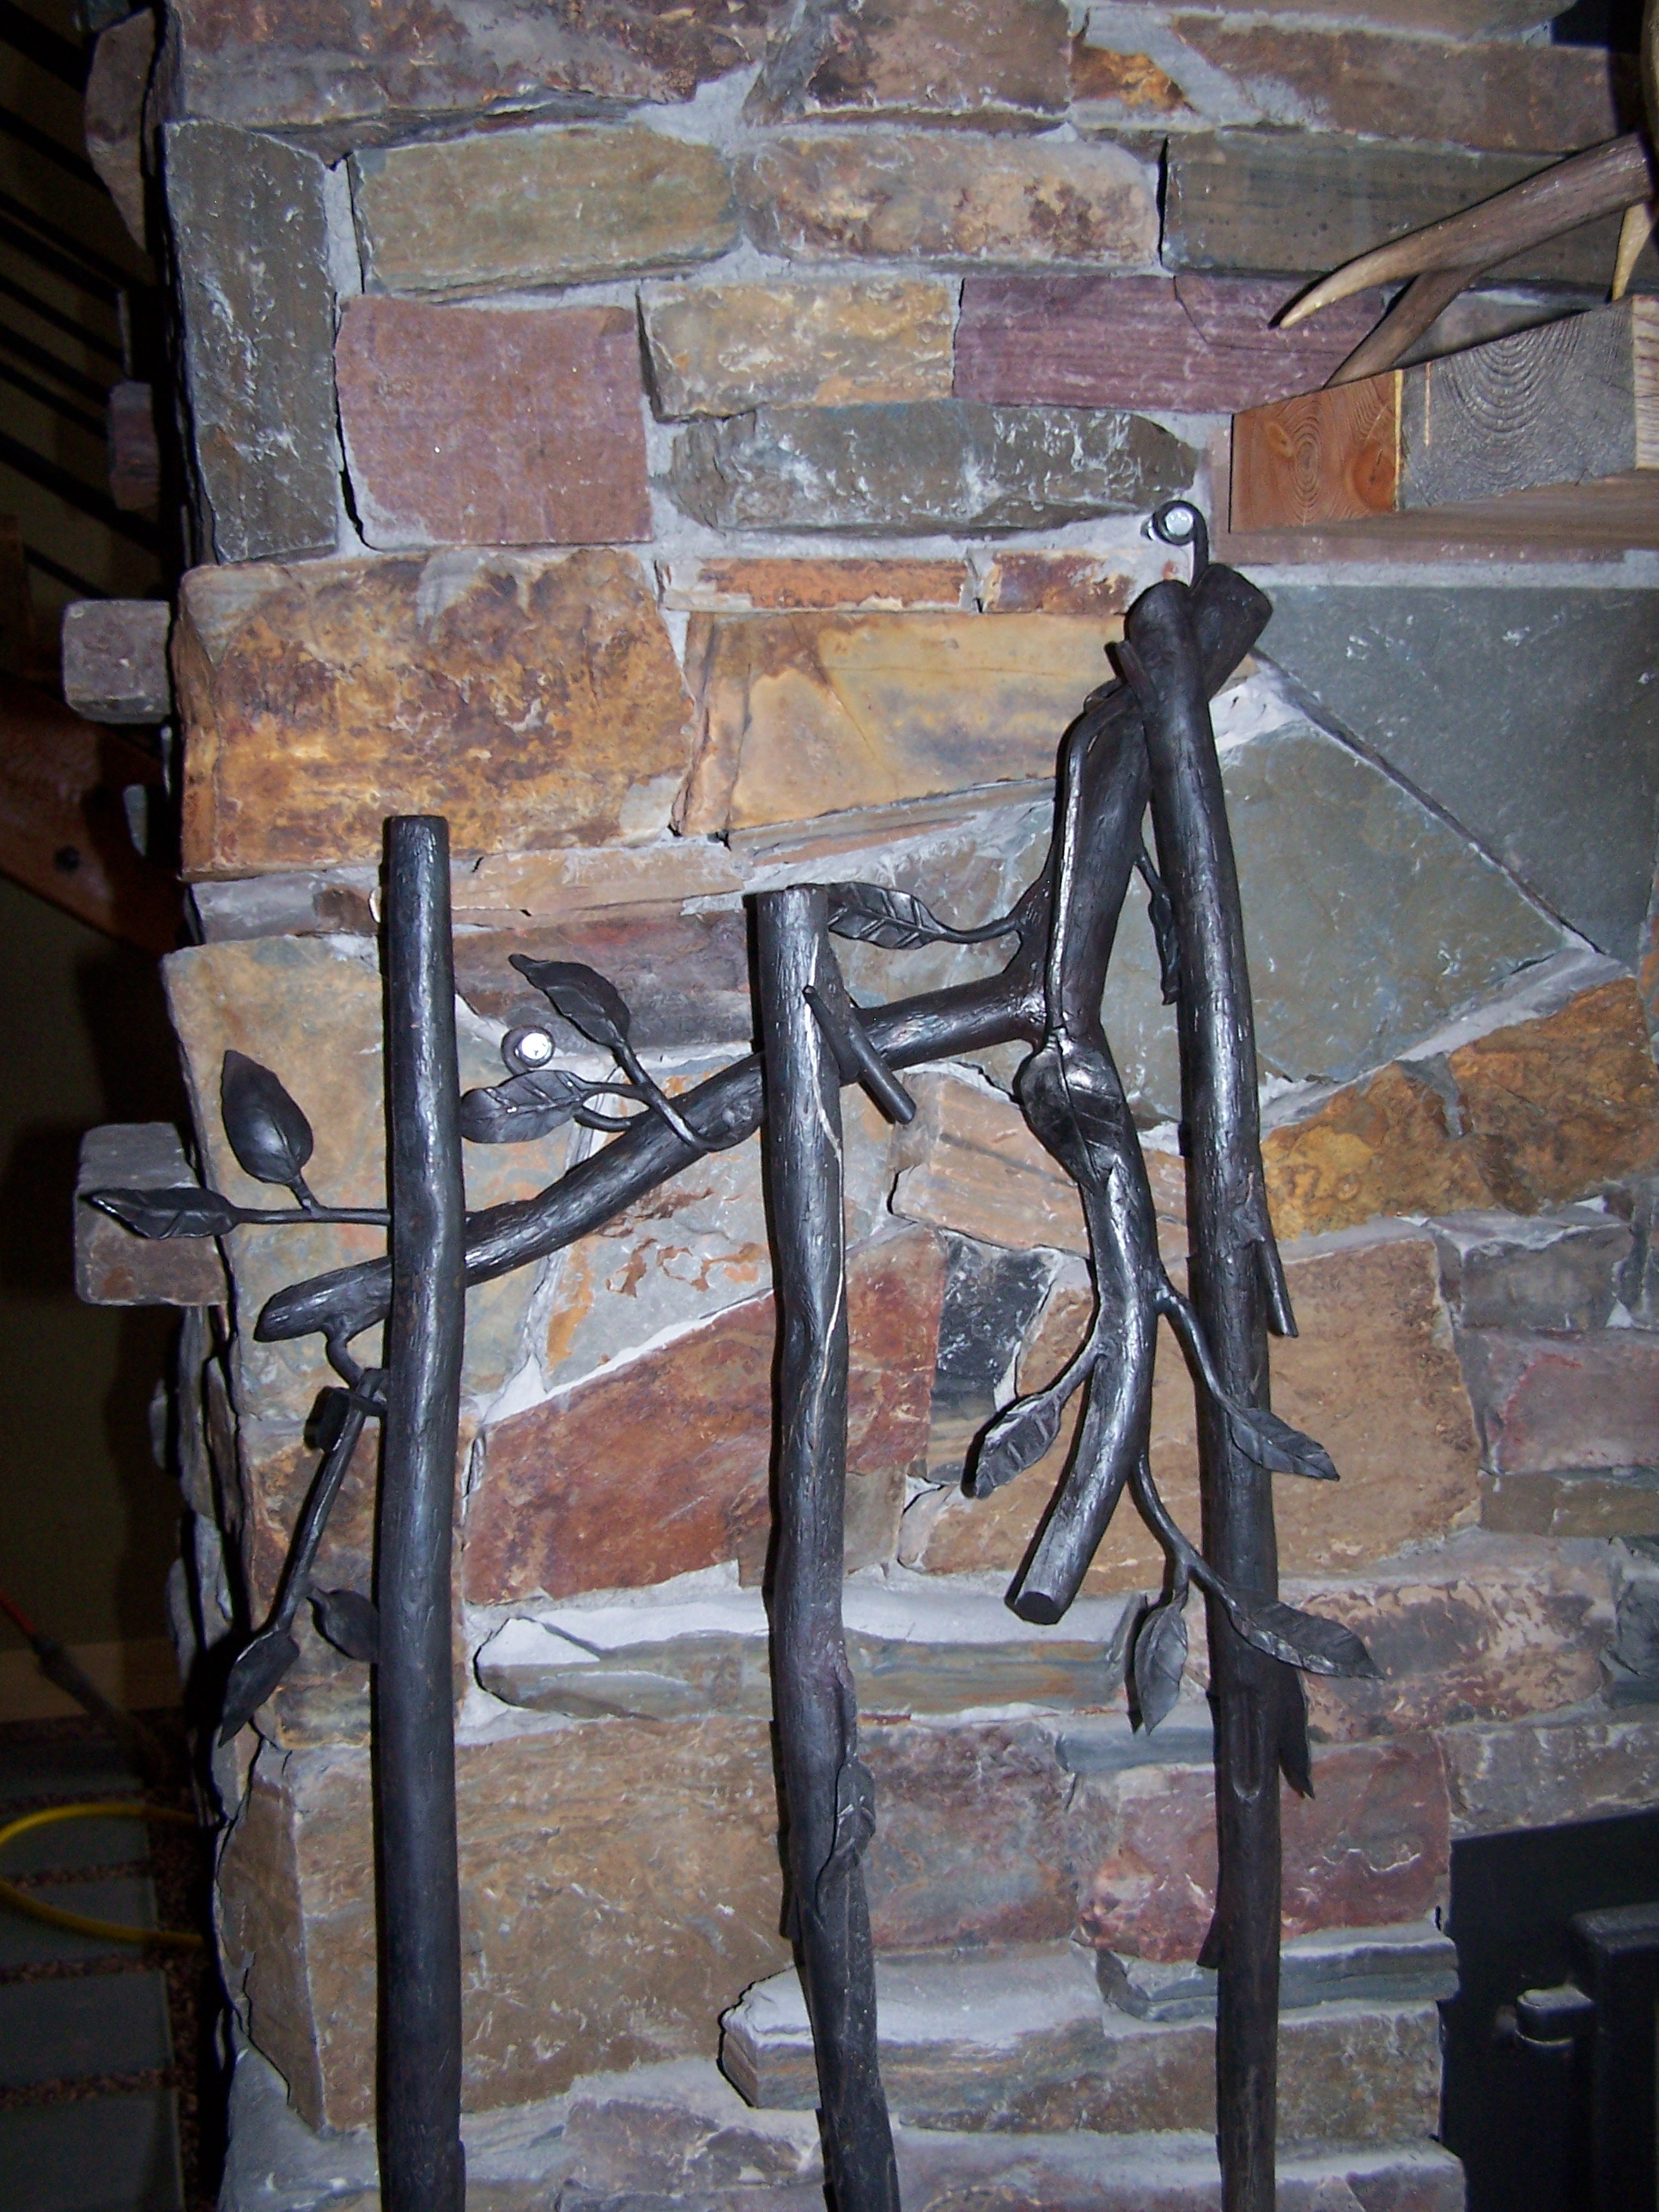 Close up of fireplace tools hanger attached to fireplace.